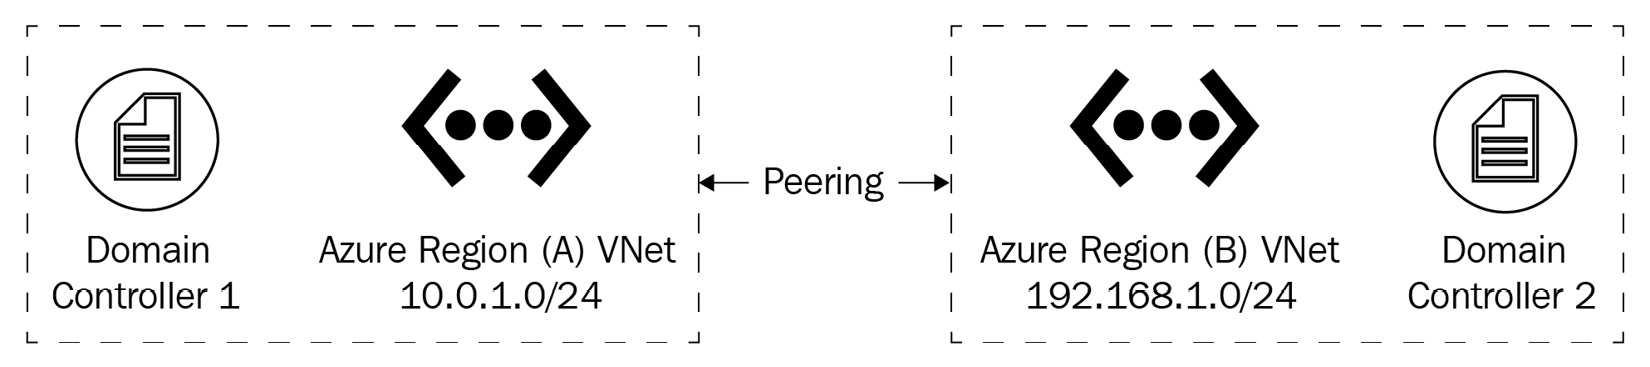 Figure 16.3 – Network peering used to enable domain controllers to communicate across Azure regions
